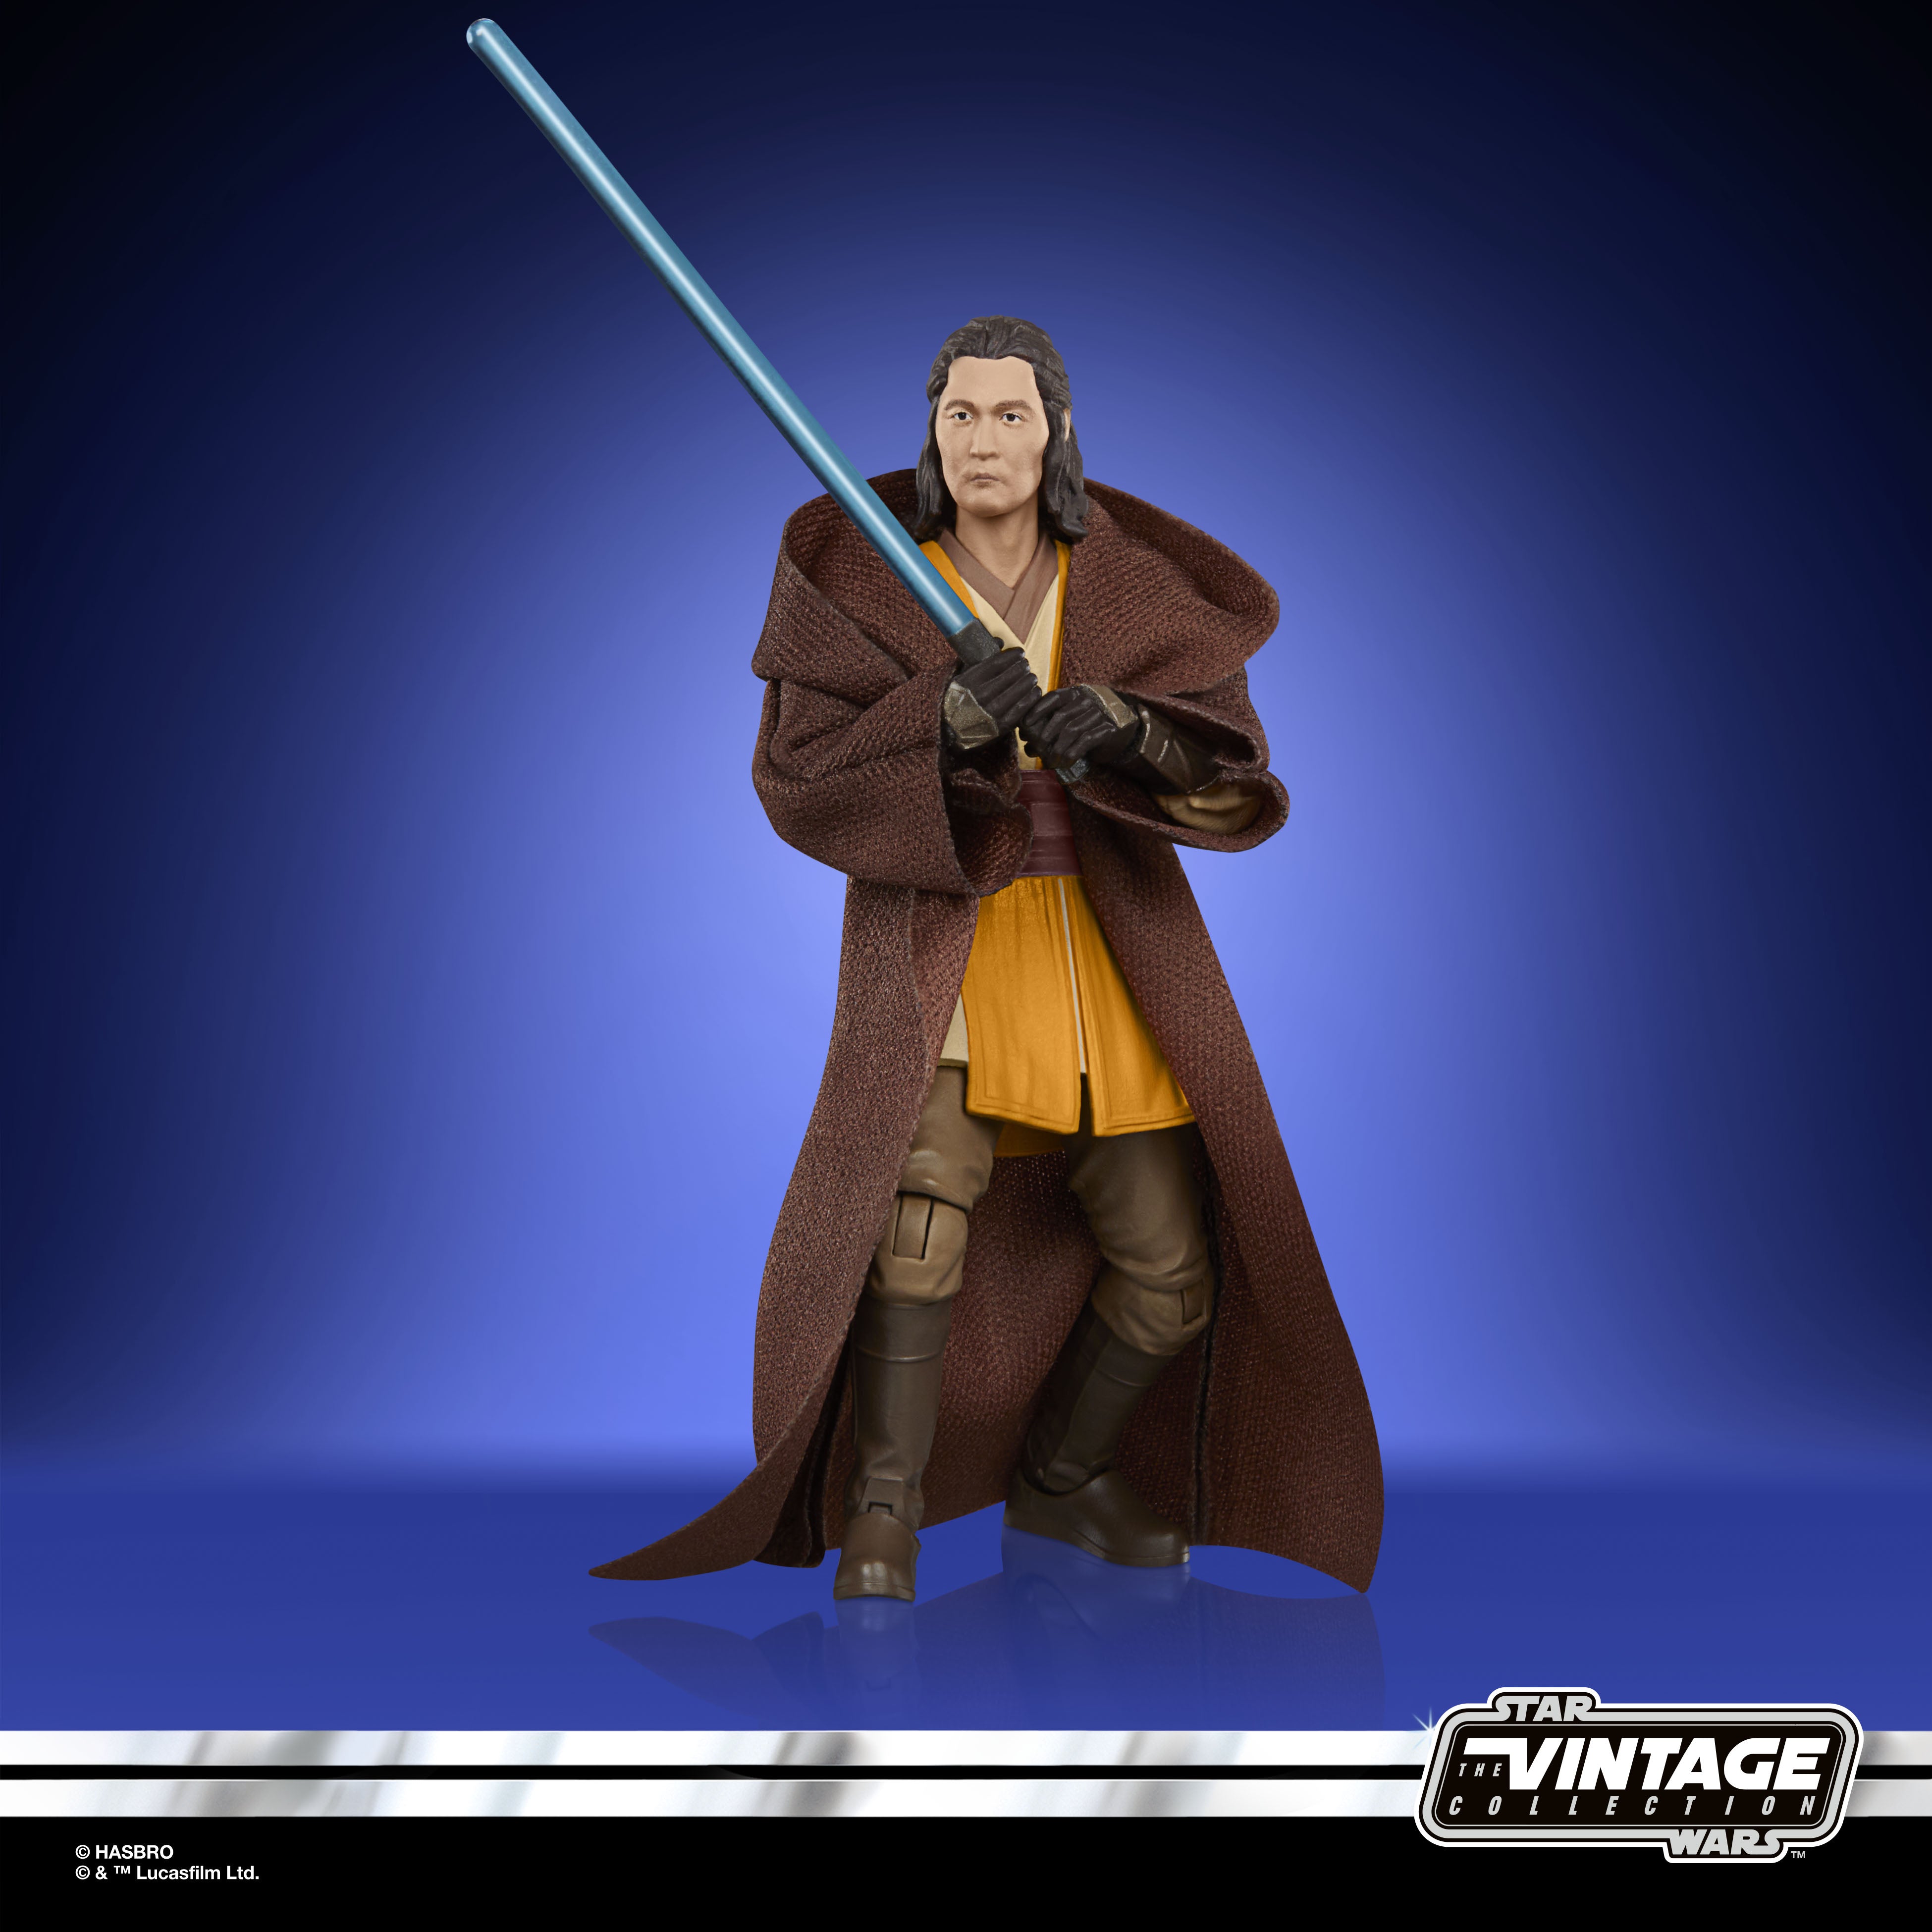 Star Wars The Vintage Collection: The Acolyte - Jedi Master Sol